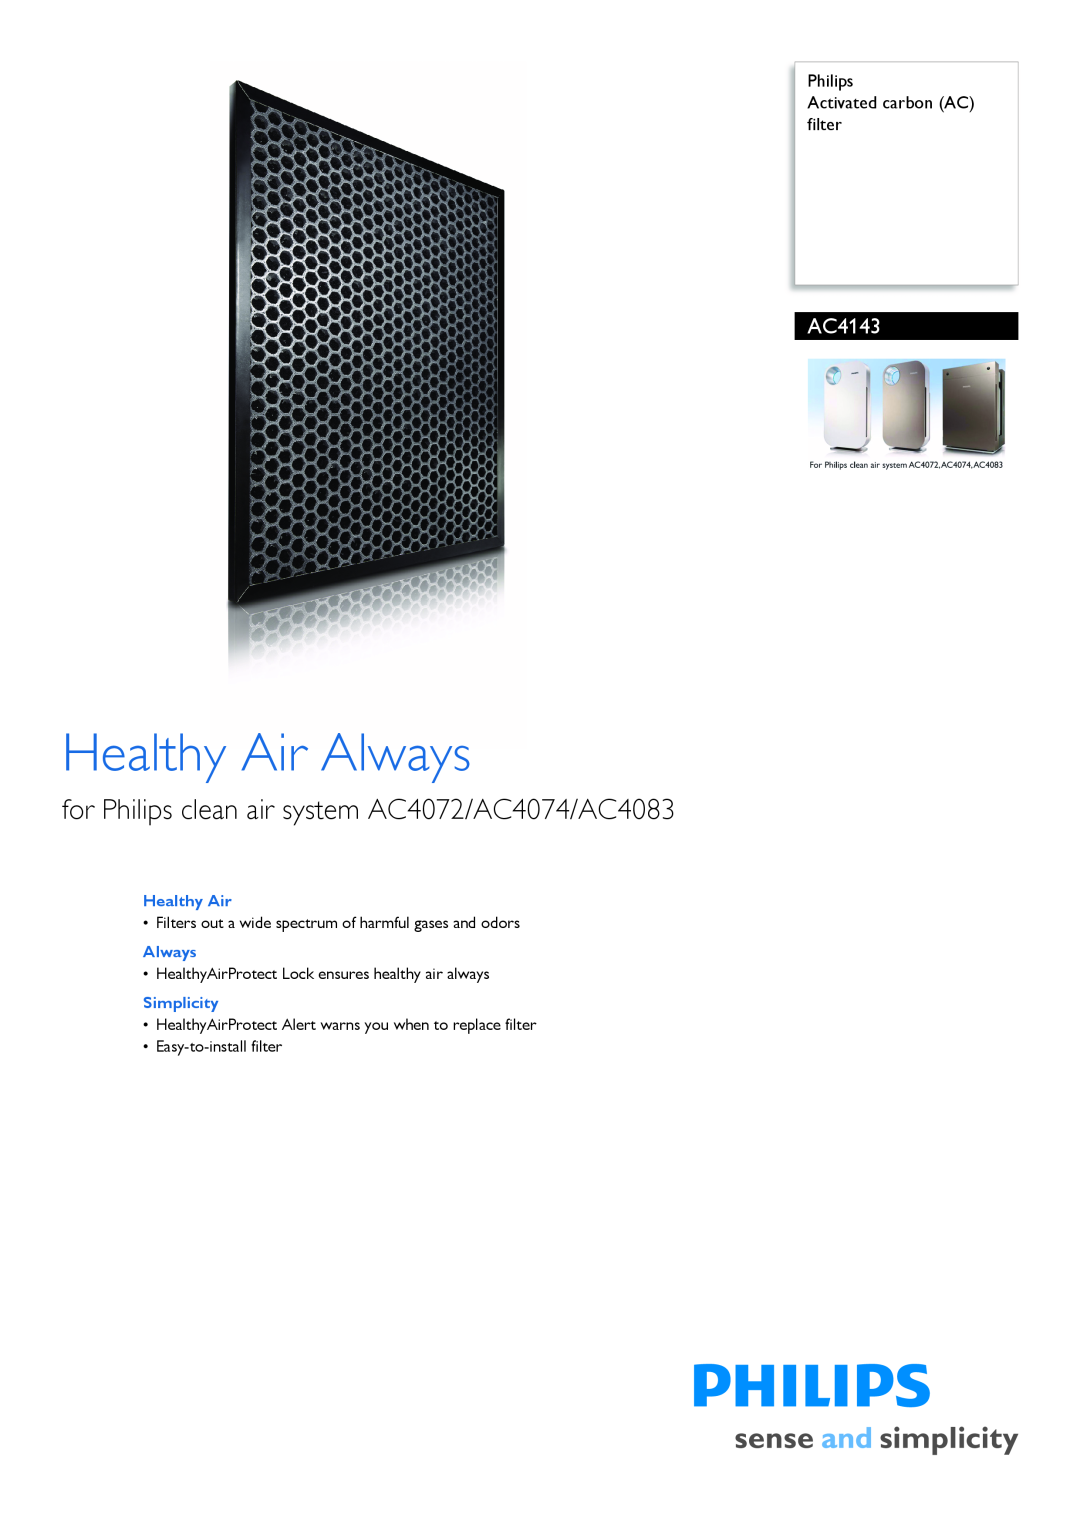 Philips AC4143 manual Philips Activated carbon AC filter, Simplicity, Healthy Air Always 